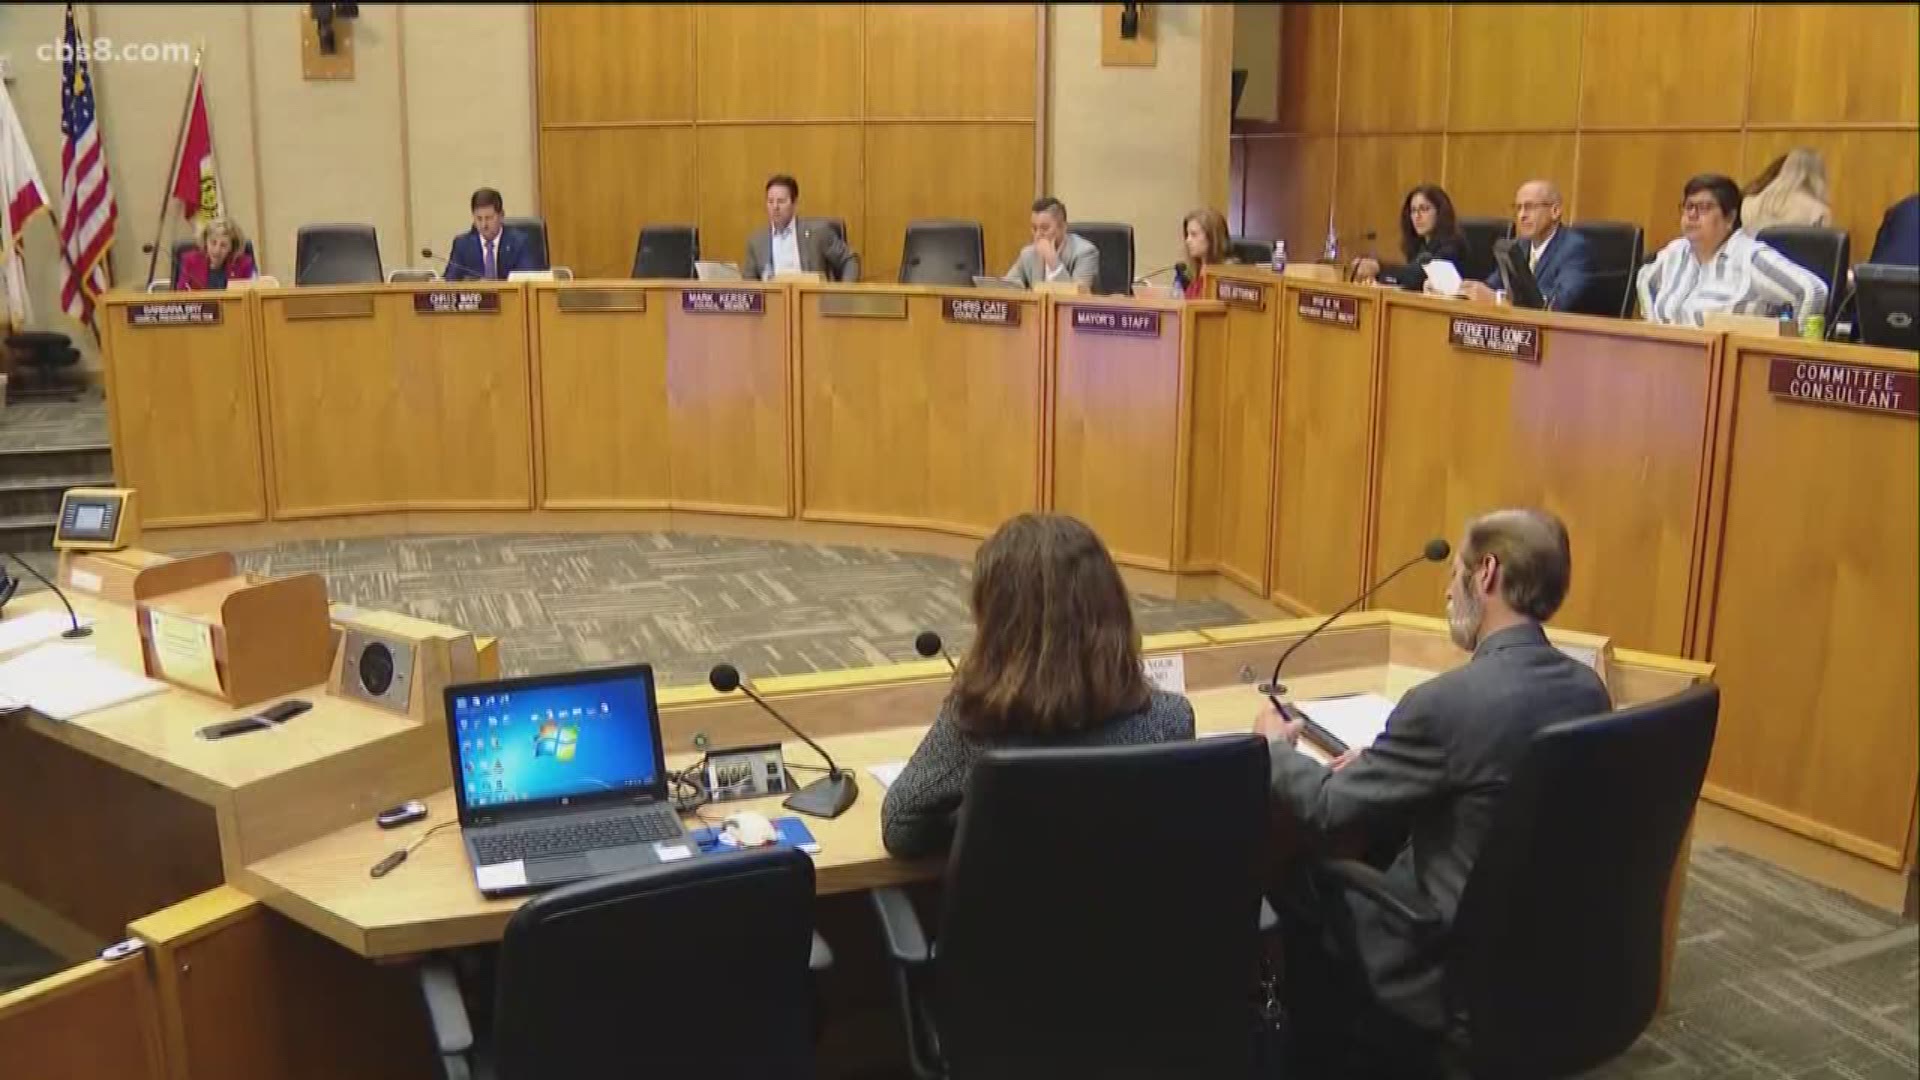 The San Diego City Council's Rules Committee on Wednesday unanimously approved two changes to the way in which San Diego Unified School District board members are elected and how they can be removed.